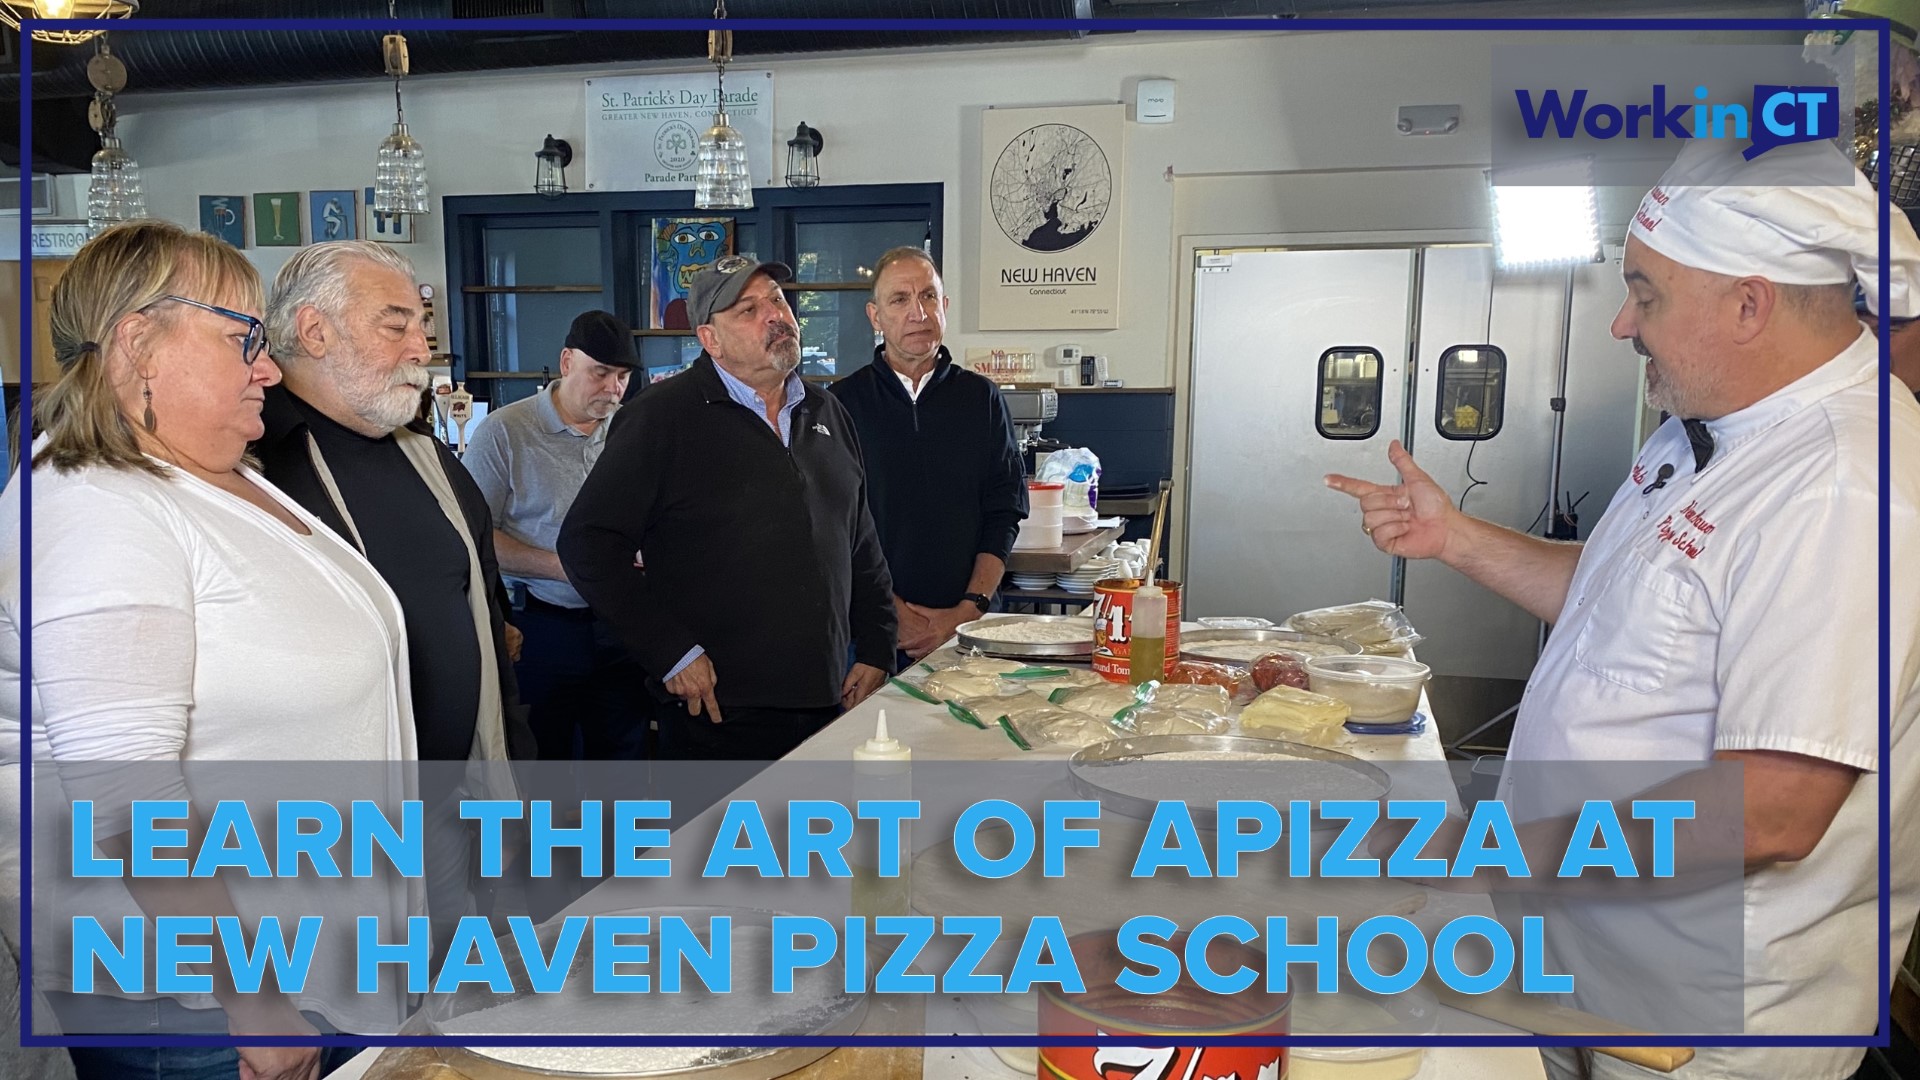 Frank Zabski is now the owner of the New Haven Pizza School and his business model is built around the almighty New Haven-style “Apizza” pie.